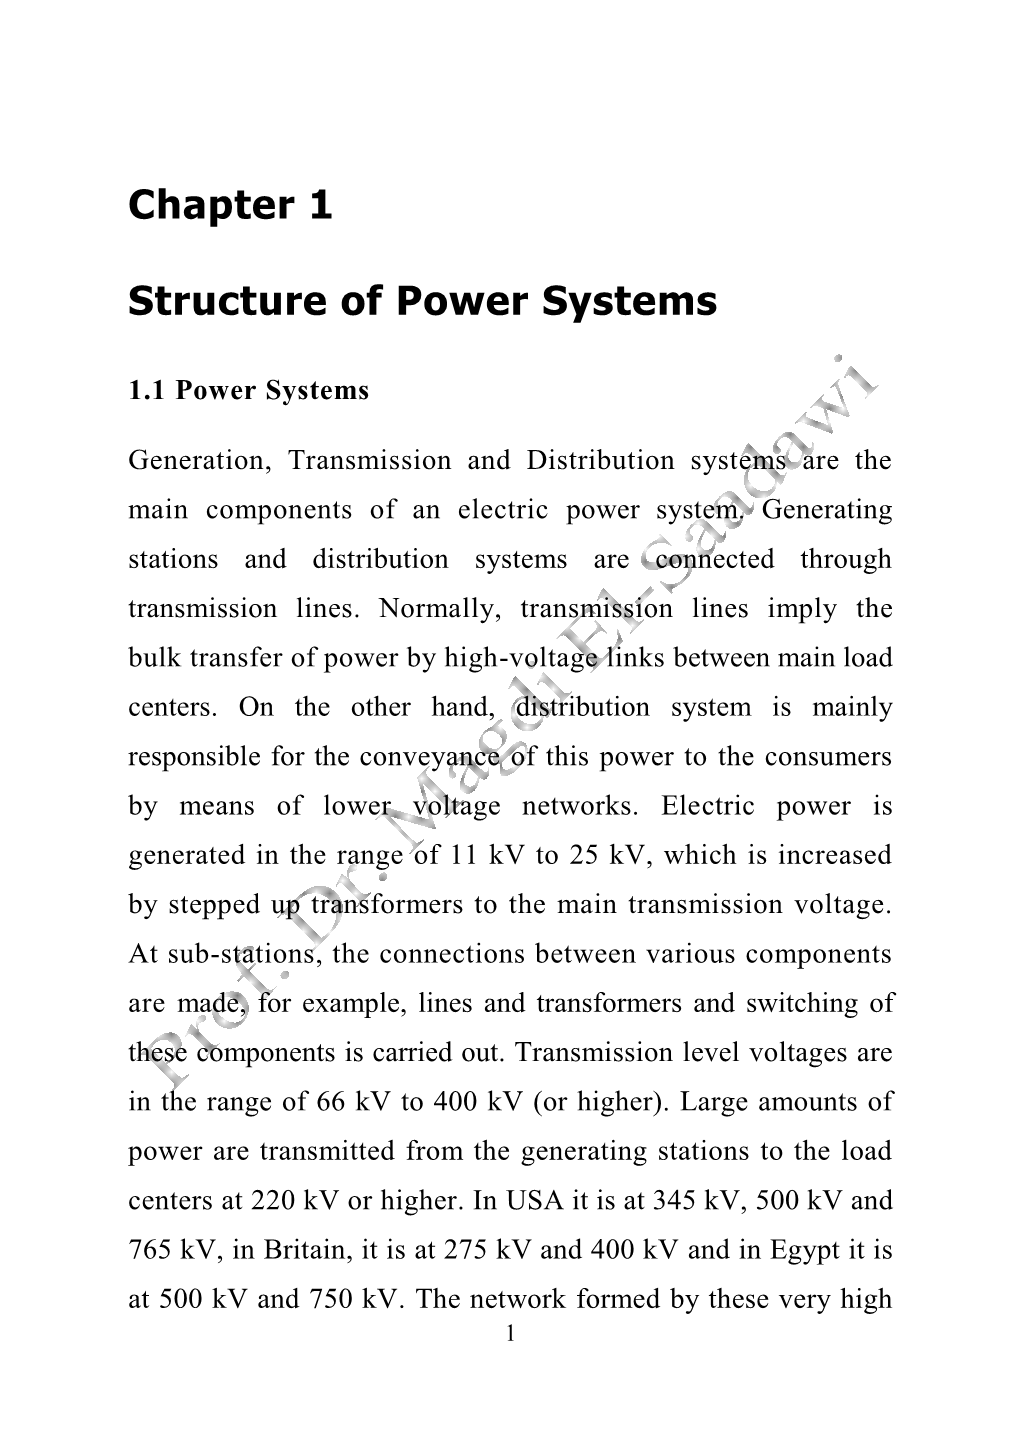 Chapter 1 Structure of Power Systems